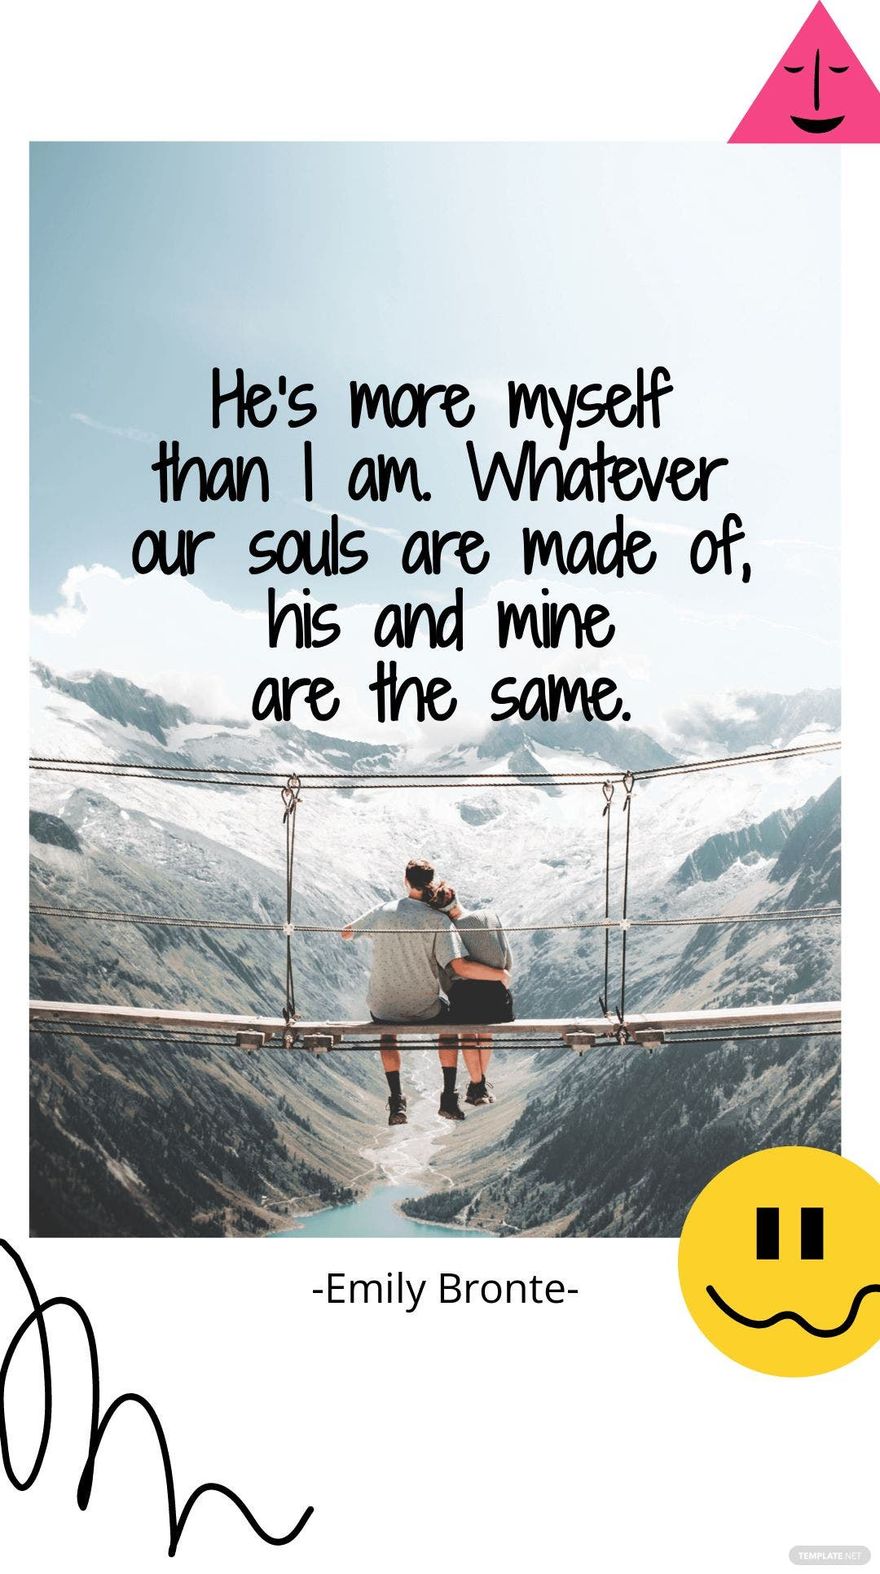 Emily Bronte - "He’s more myself than I am. Whatever our souls are made of, his and mine are the same.” 